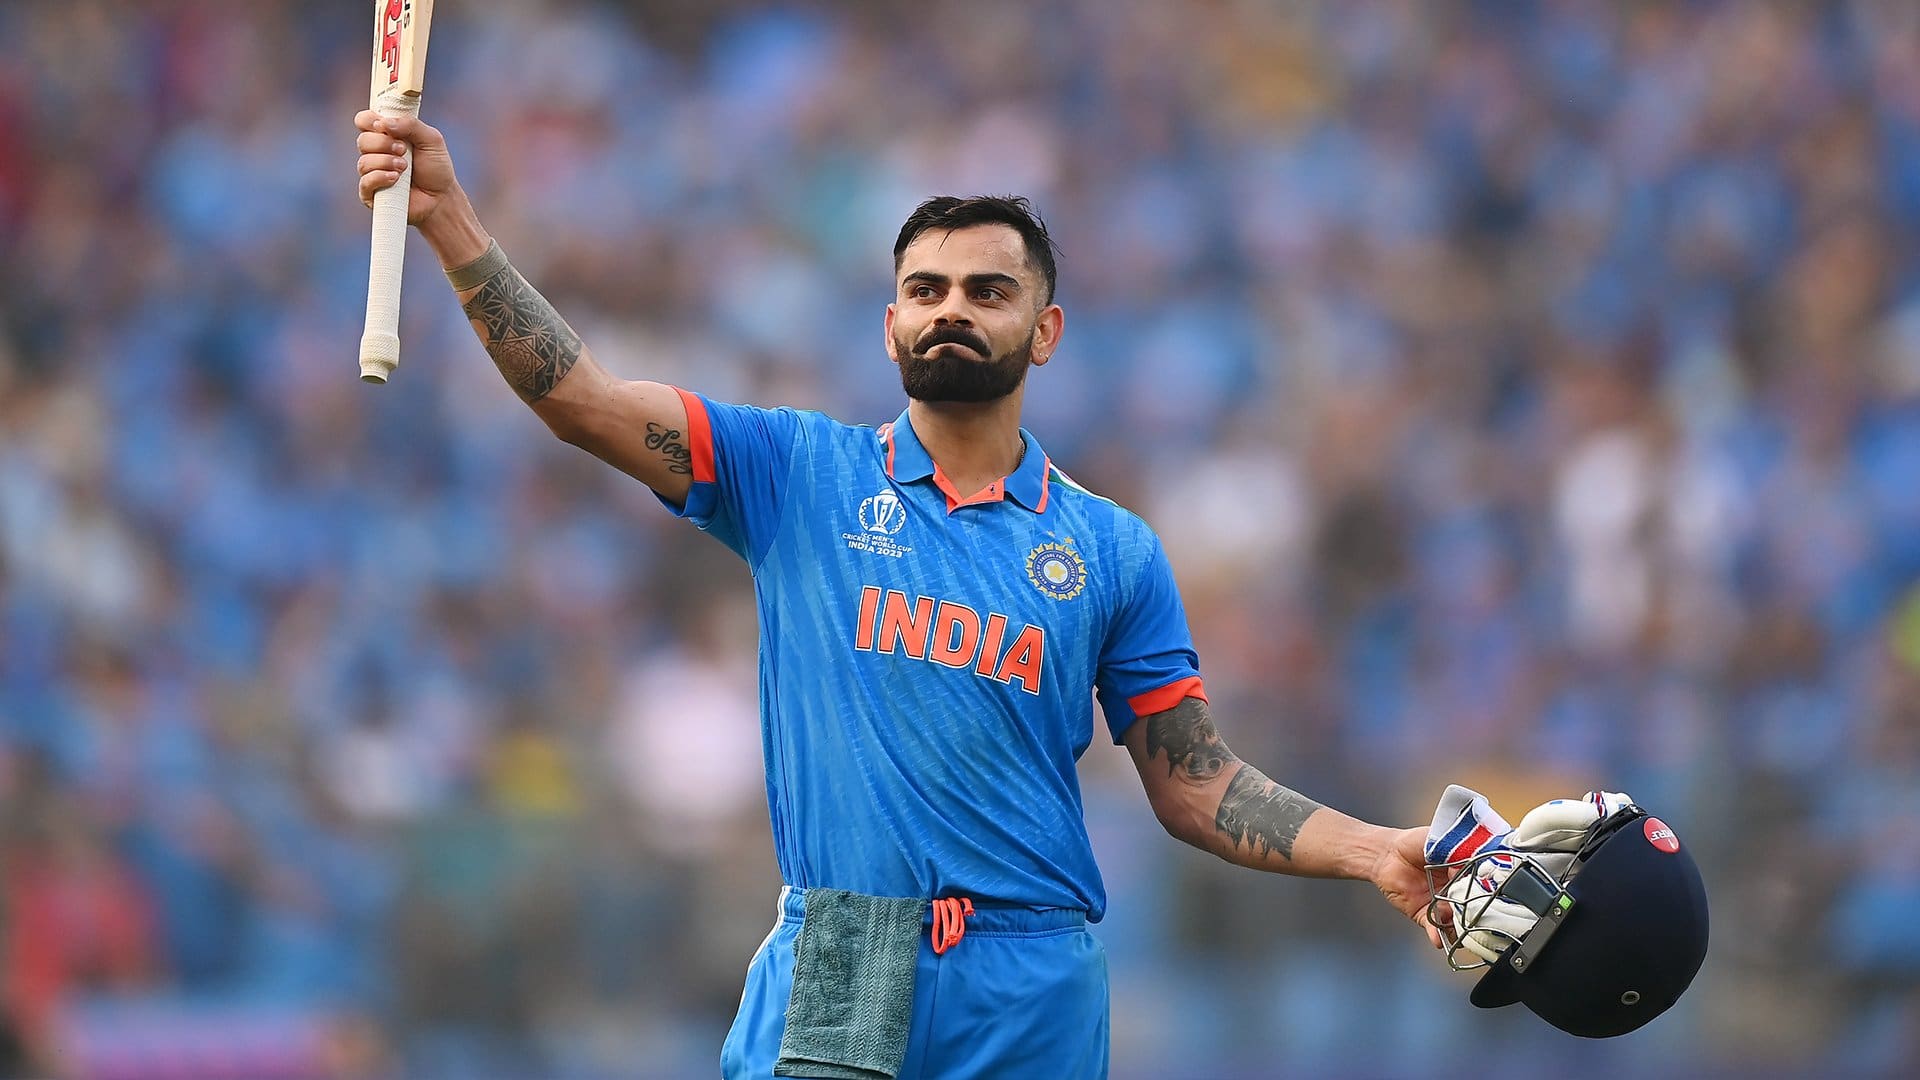 Why Virat Kohli Is Not Playing T20 vs Afghanistan? The 'Real' Reason Revealed